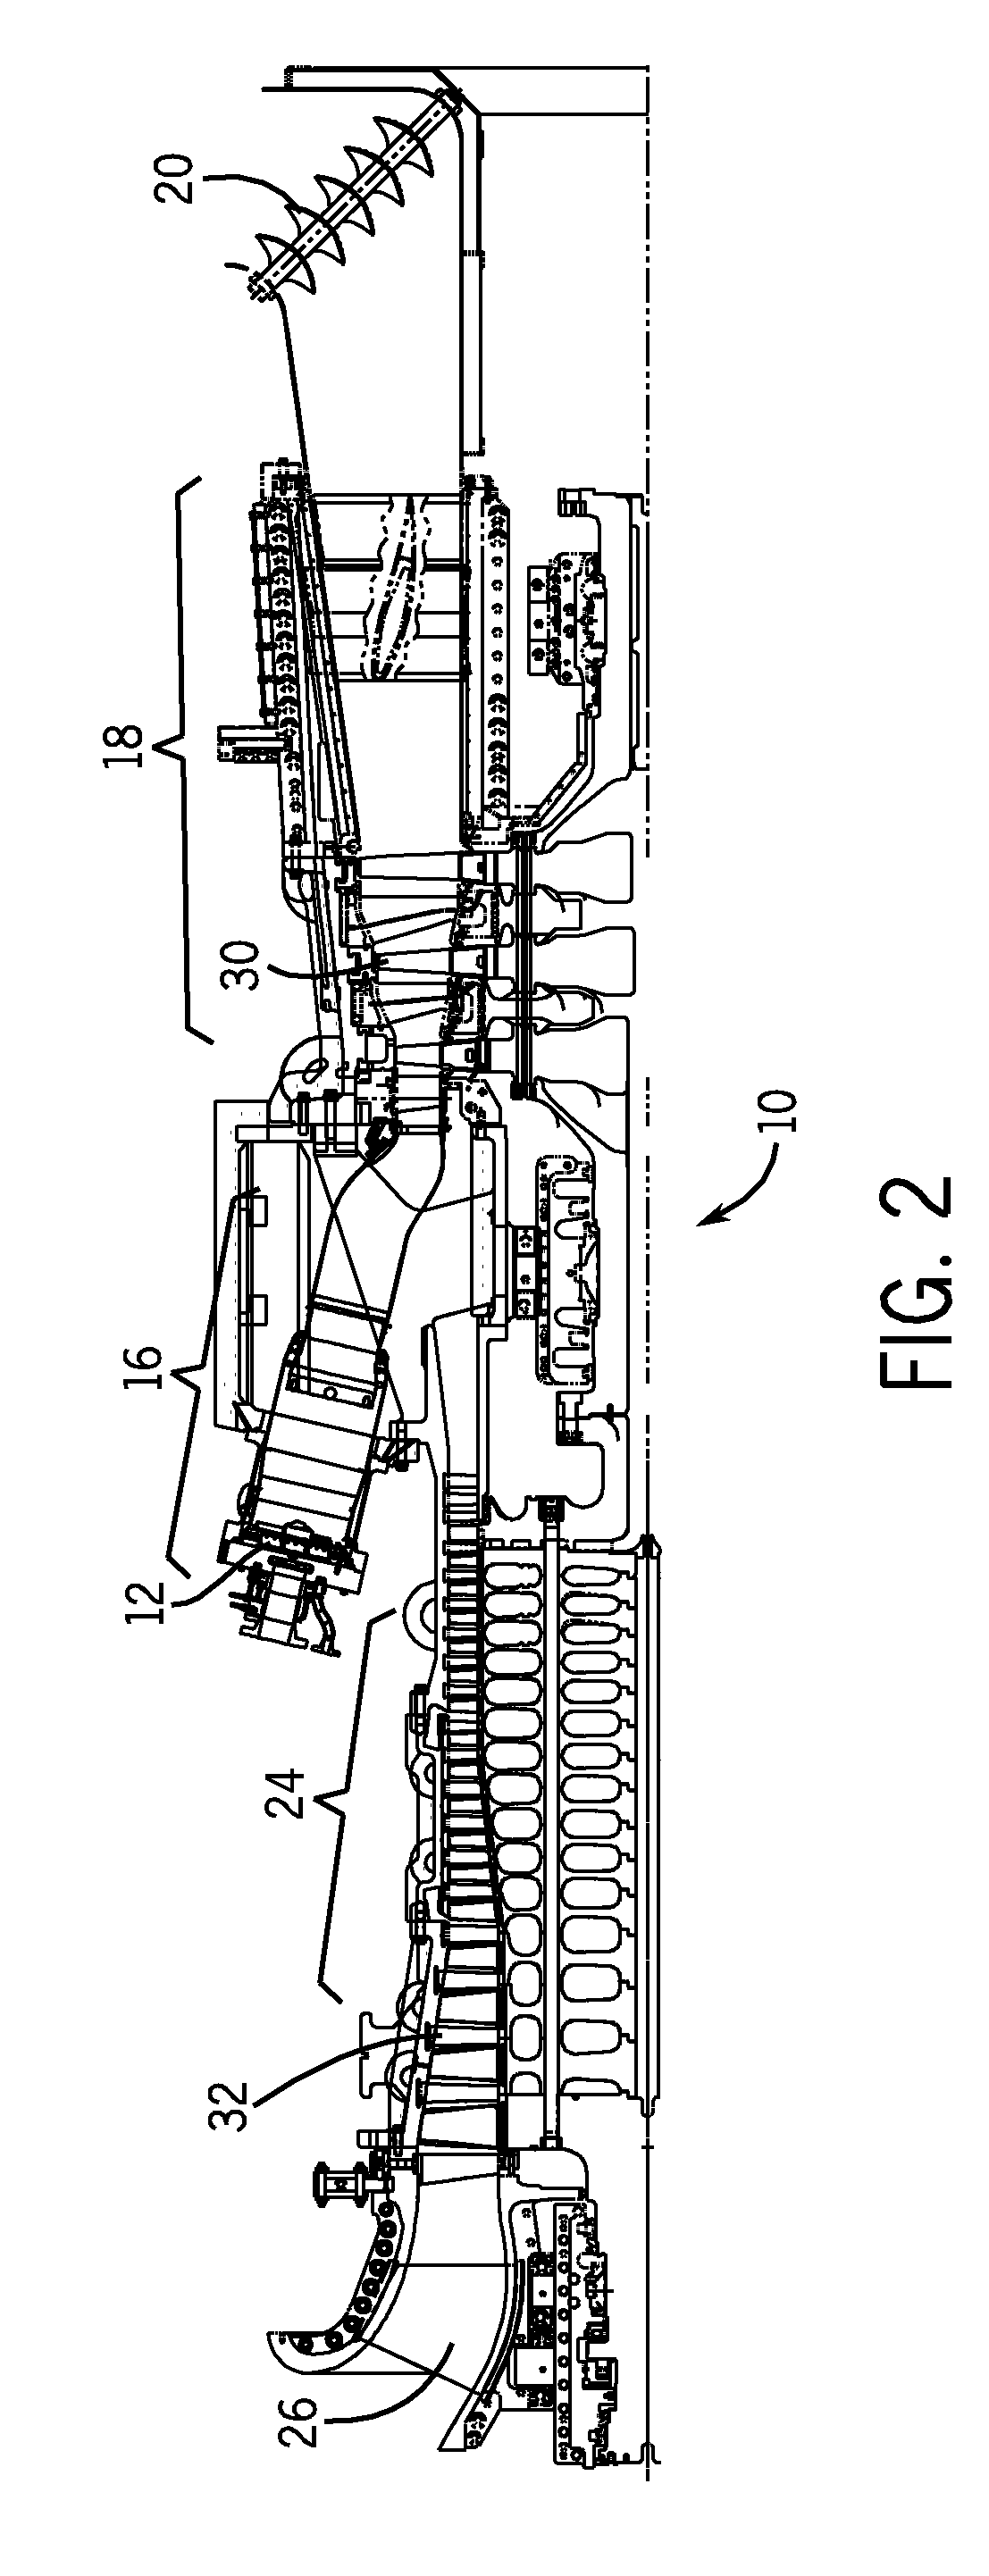 Method and apparatus for air and fuel injection in a turbine